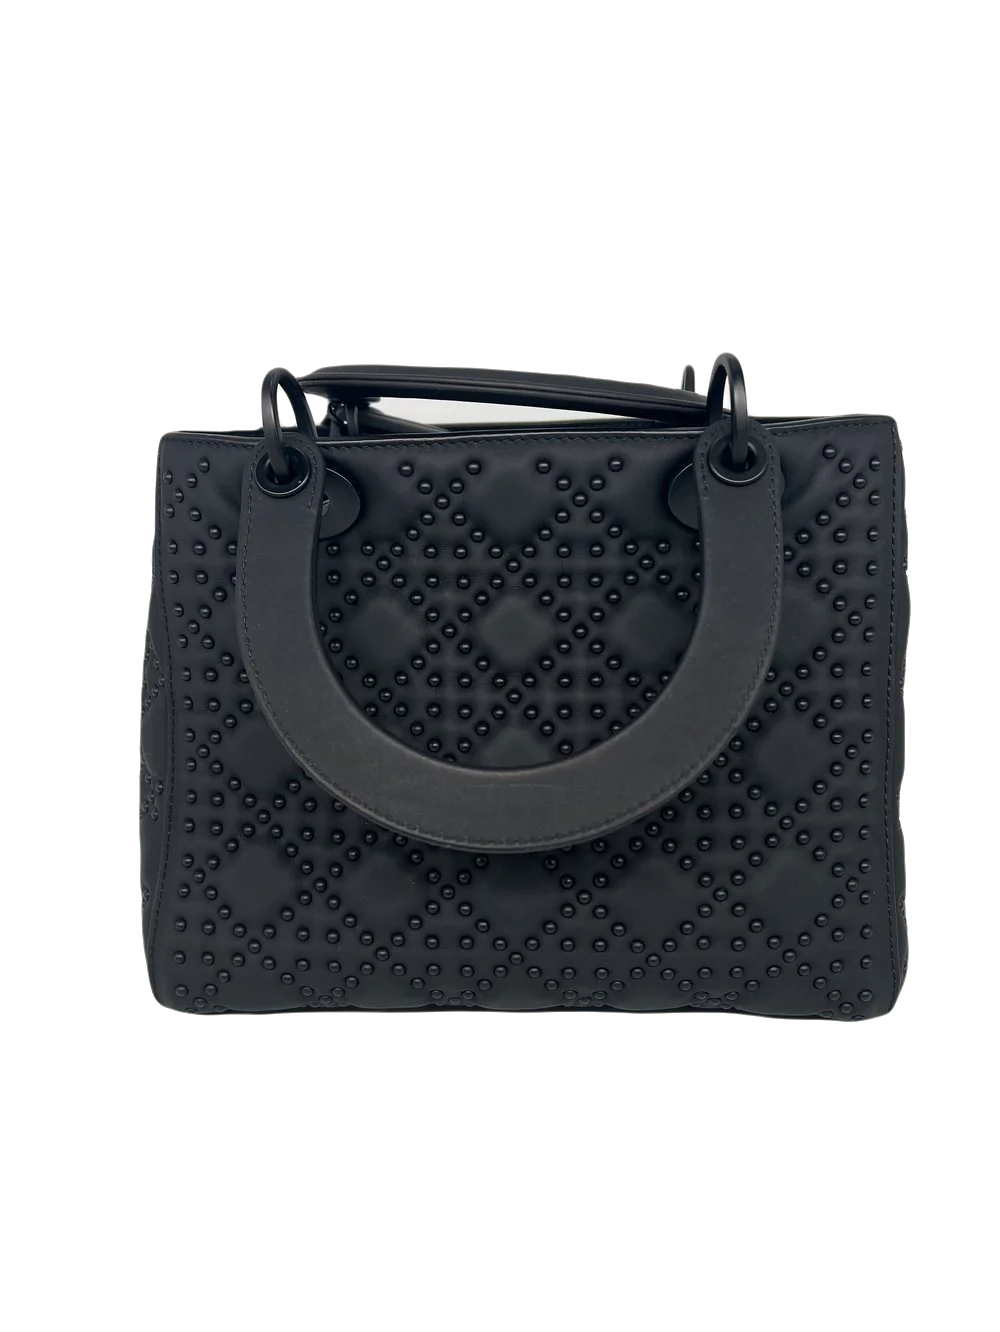 Christian Dior Supple Lady Dior - Matte Black with Studs